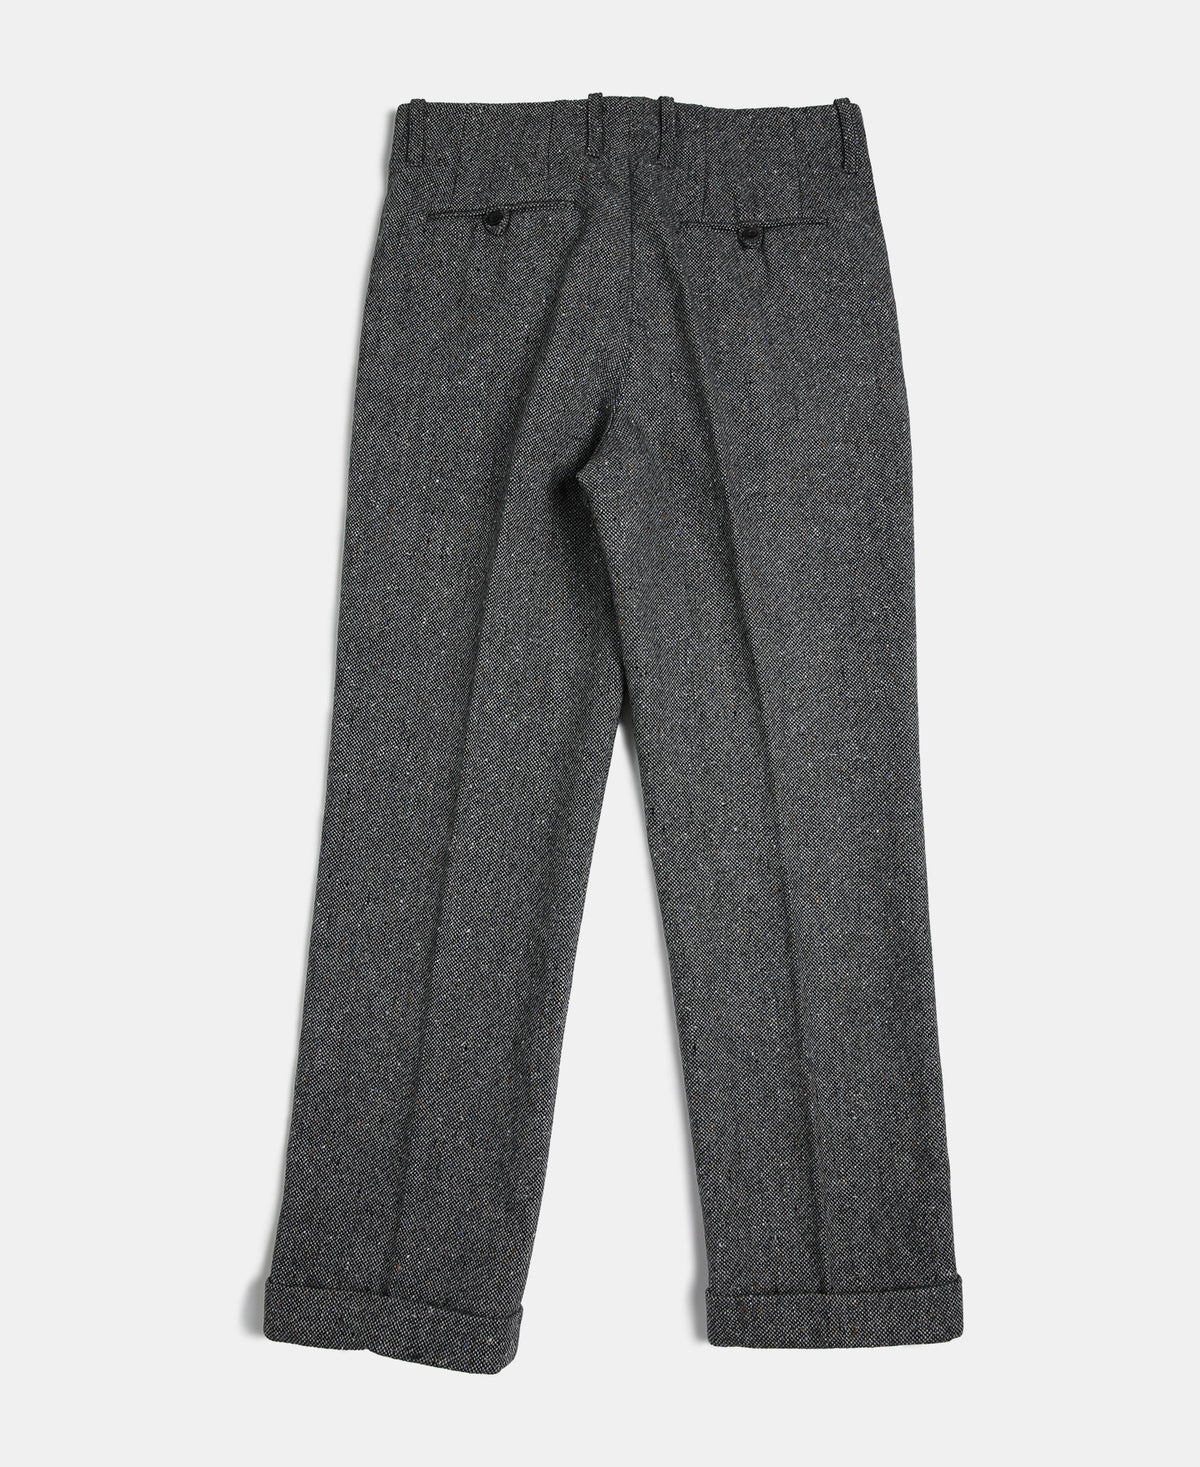 1940s Hollywood Waistband Coloured Speckle Tweed Trousers